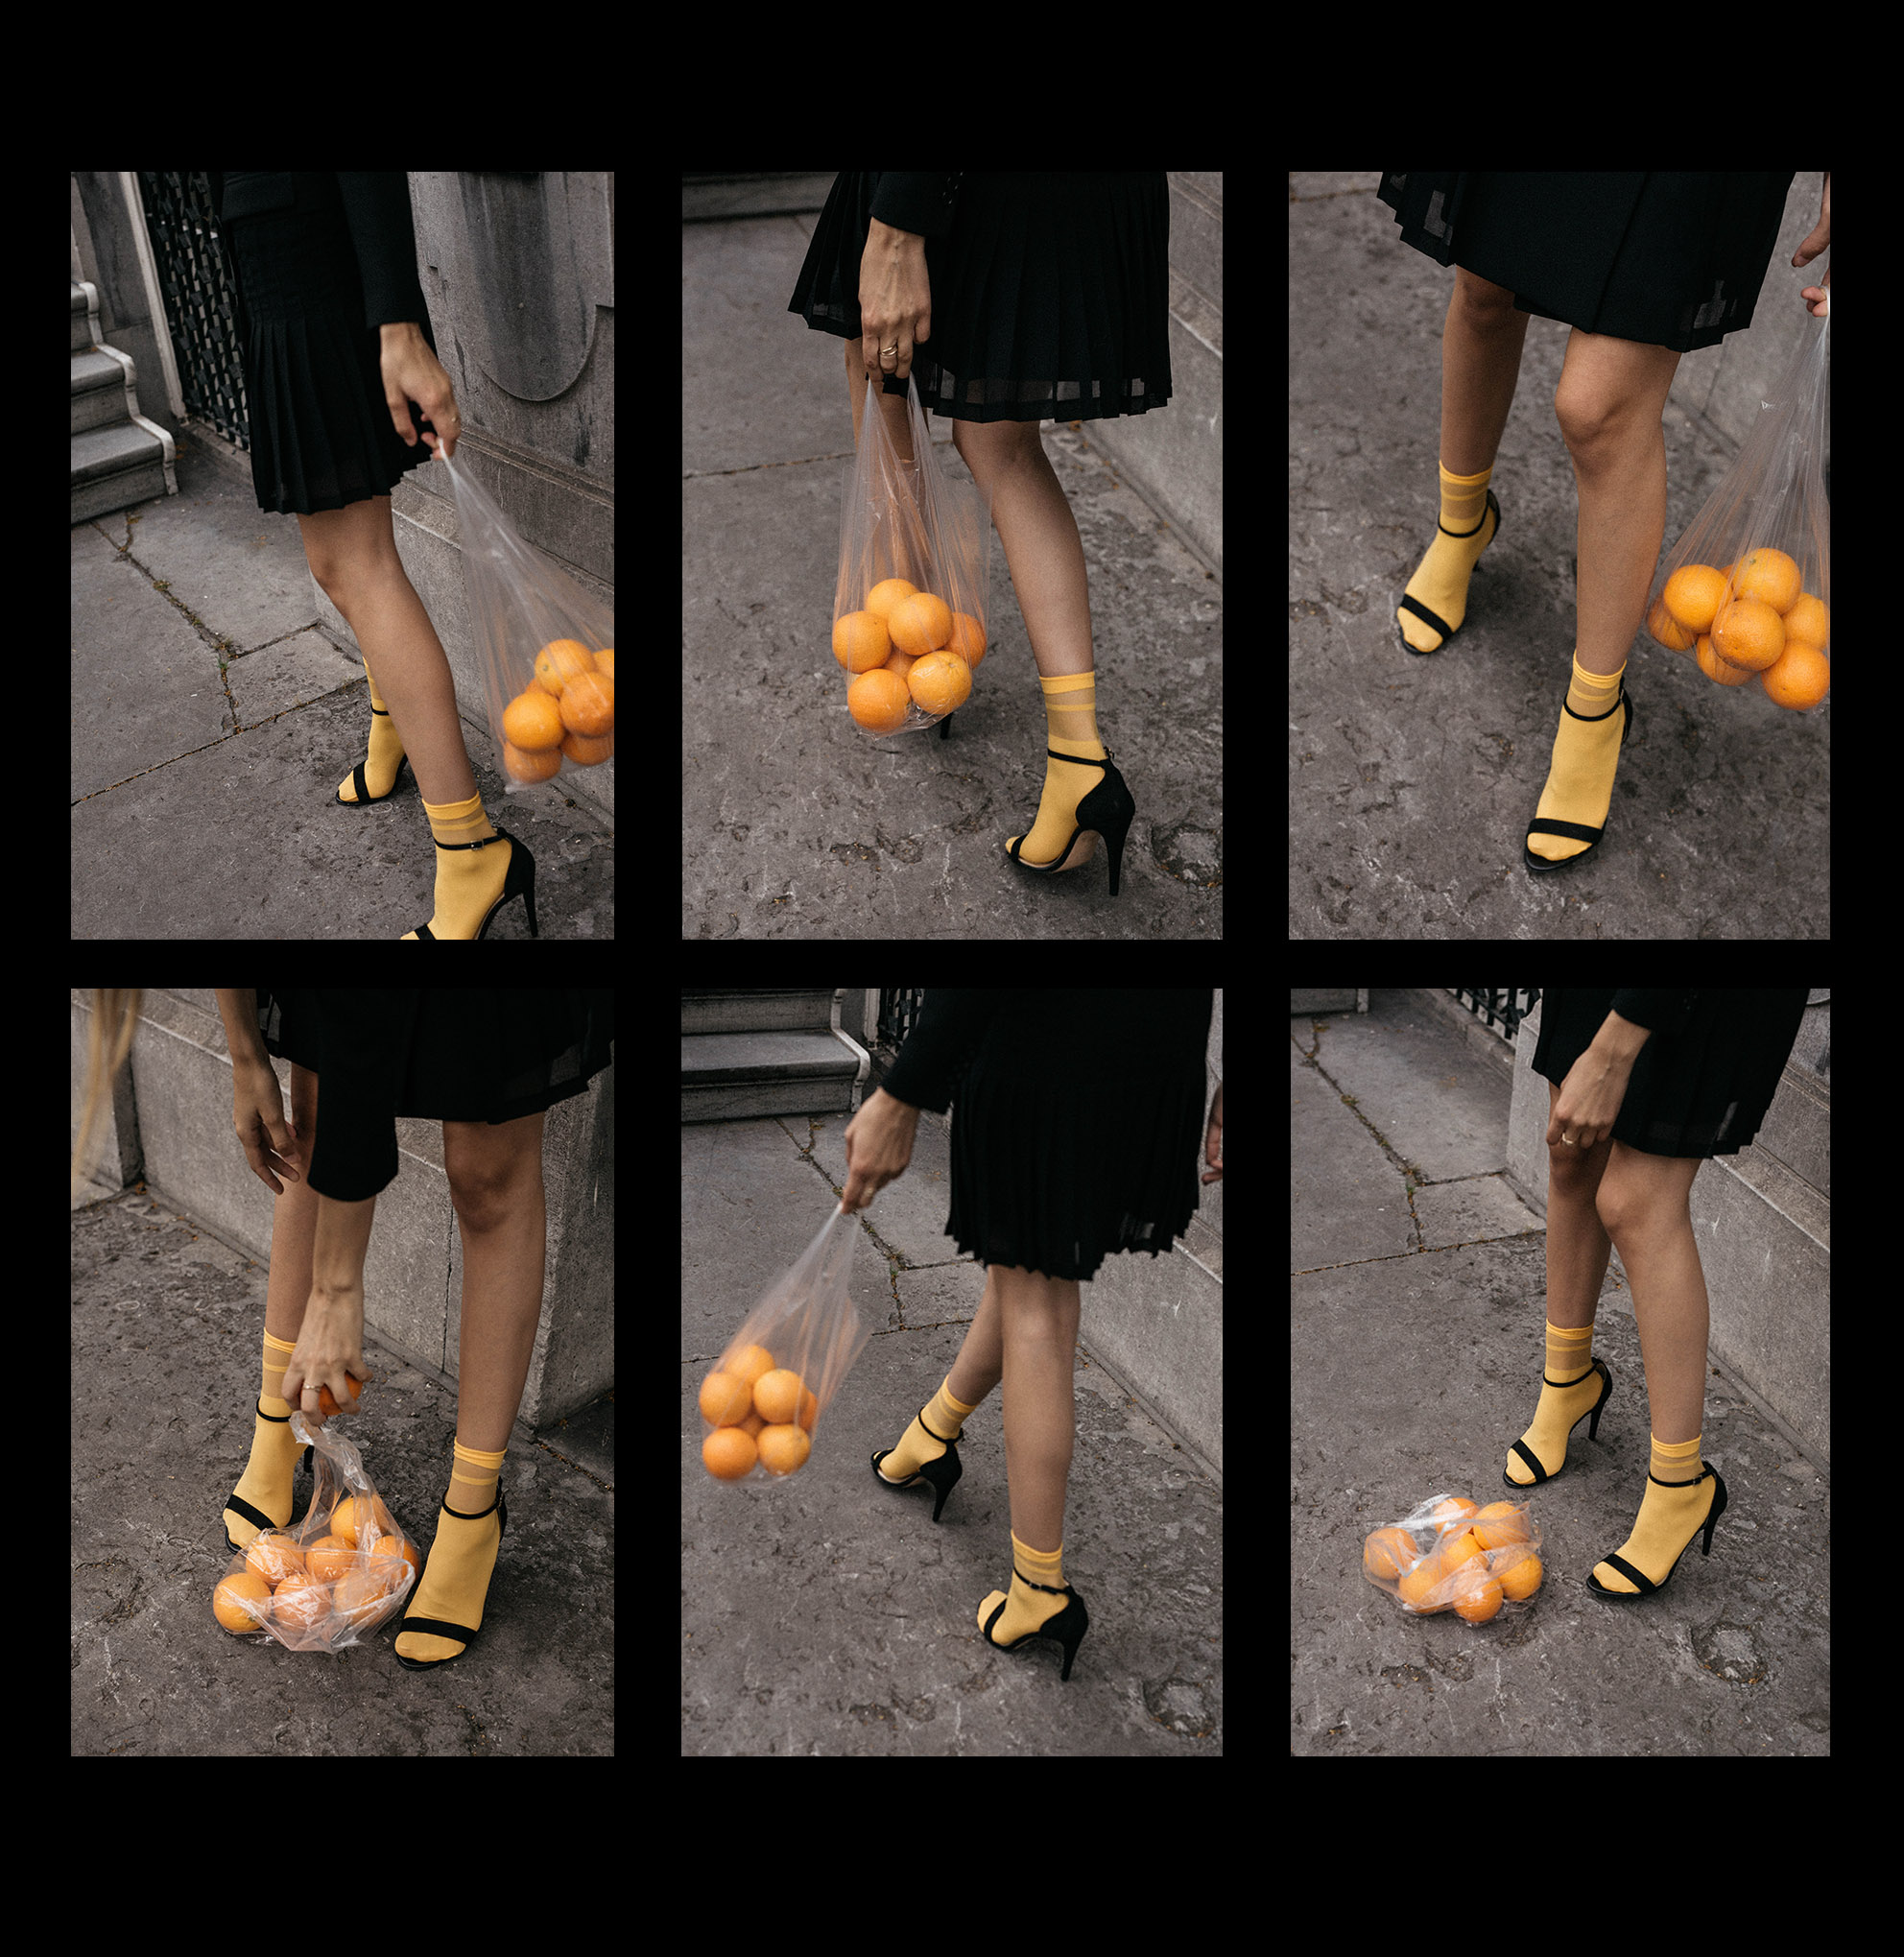 bright-yellow-socks-with-strappy-sandals-oranges-in-plastic-bag-trend-creative-content-fashion-influencer-beatrice-gutu-8